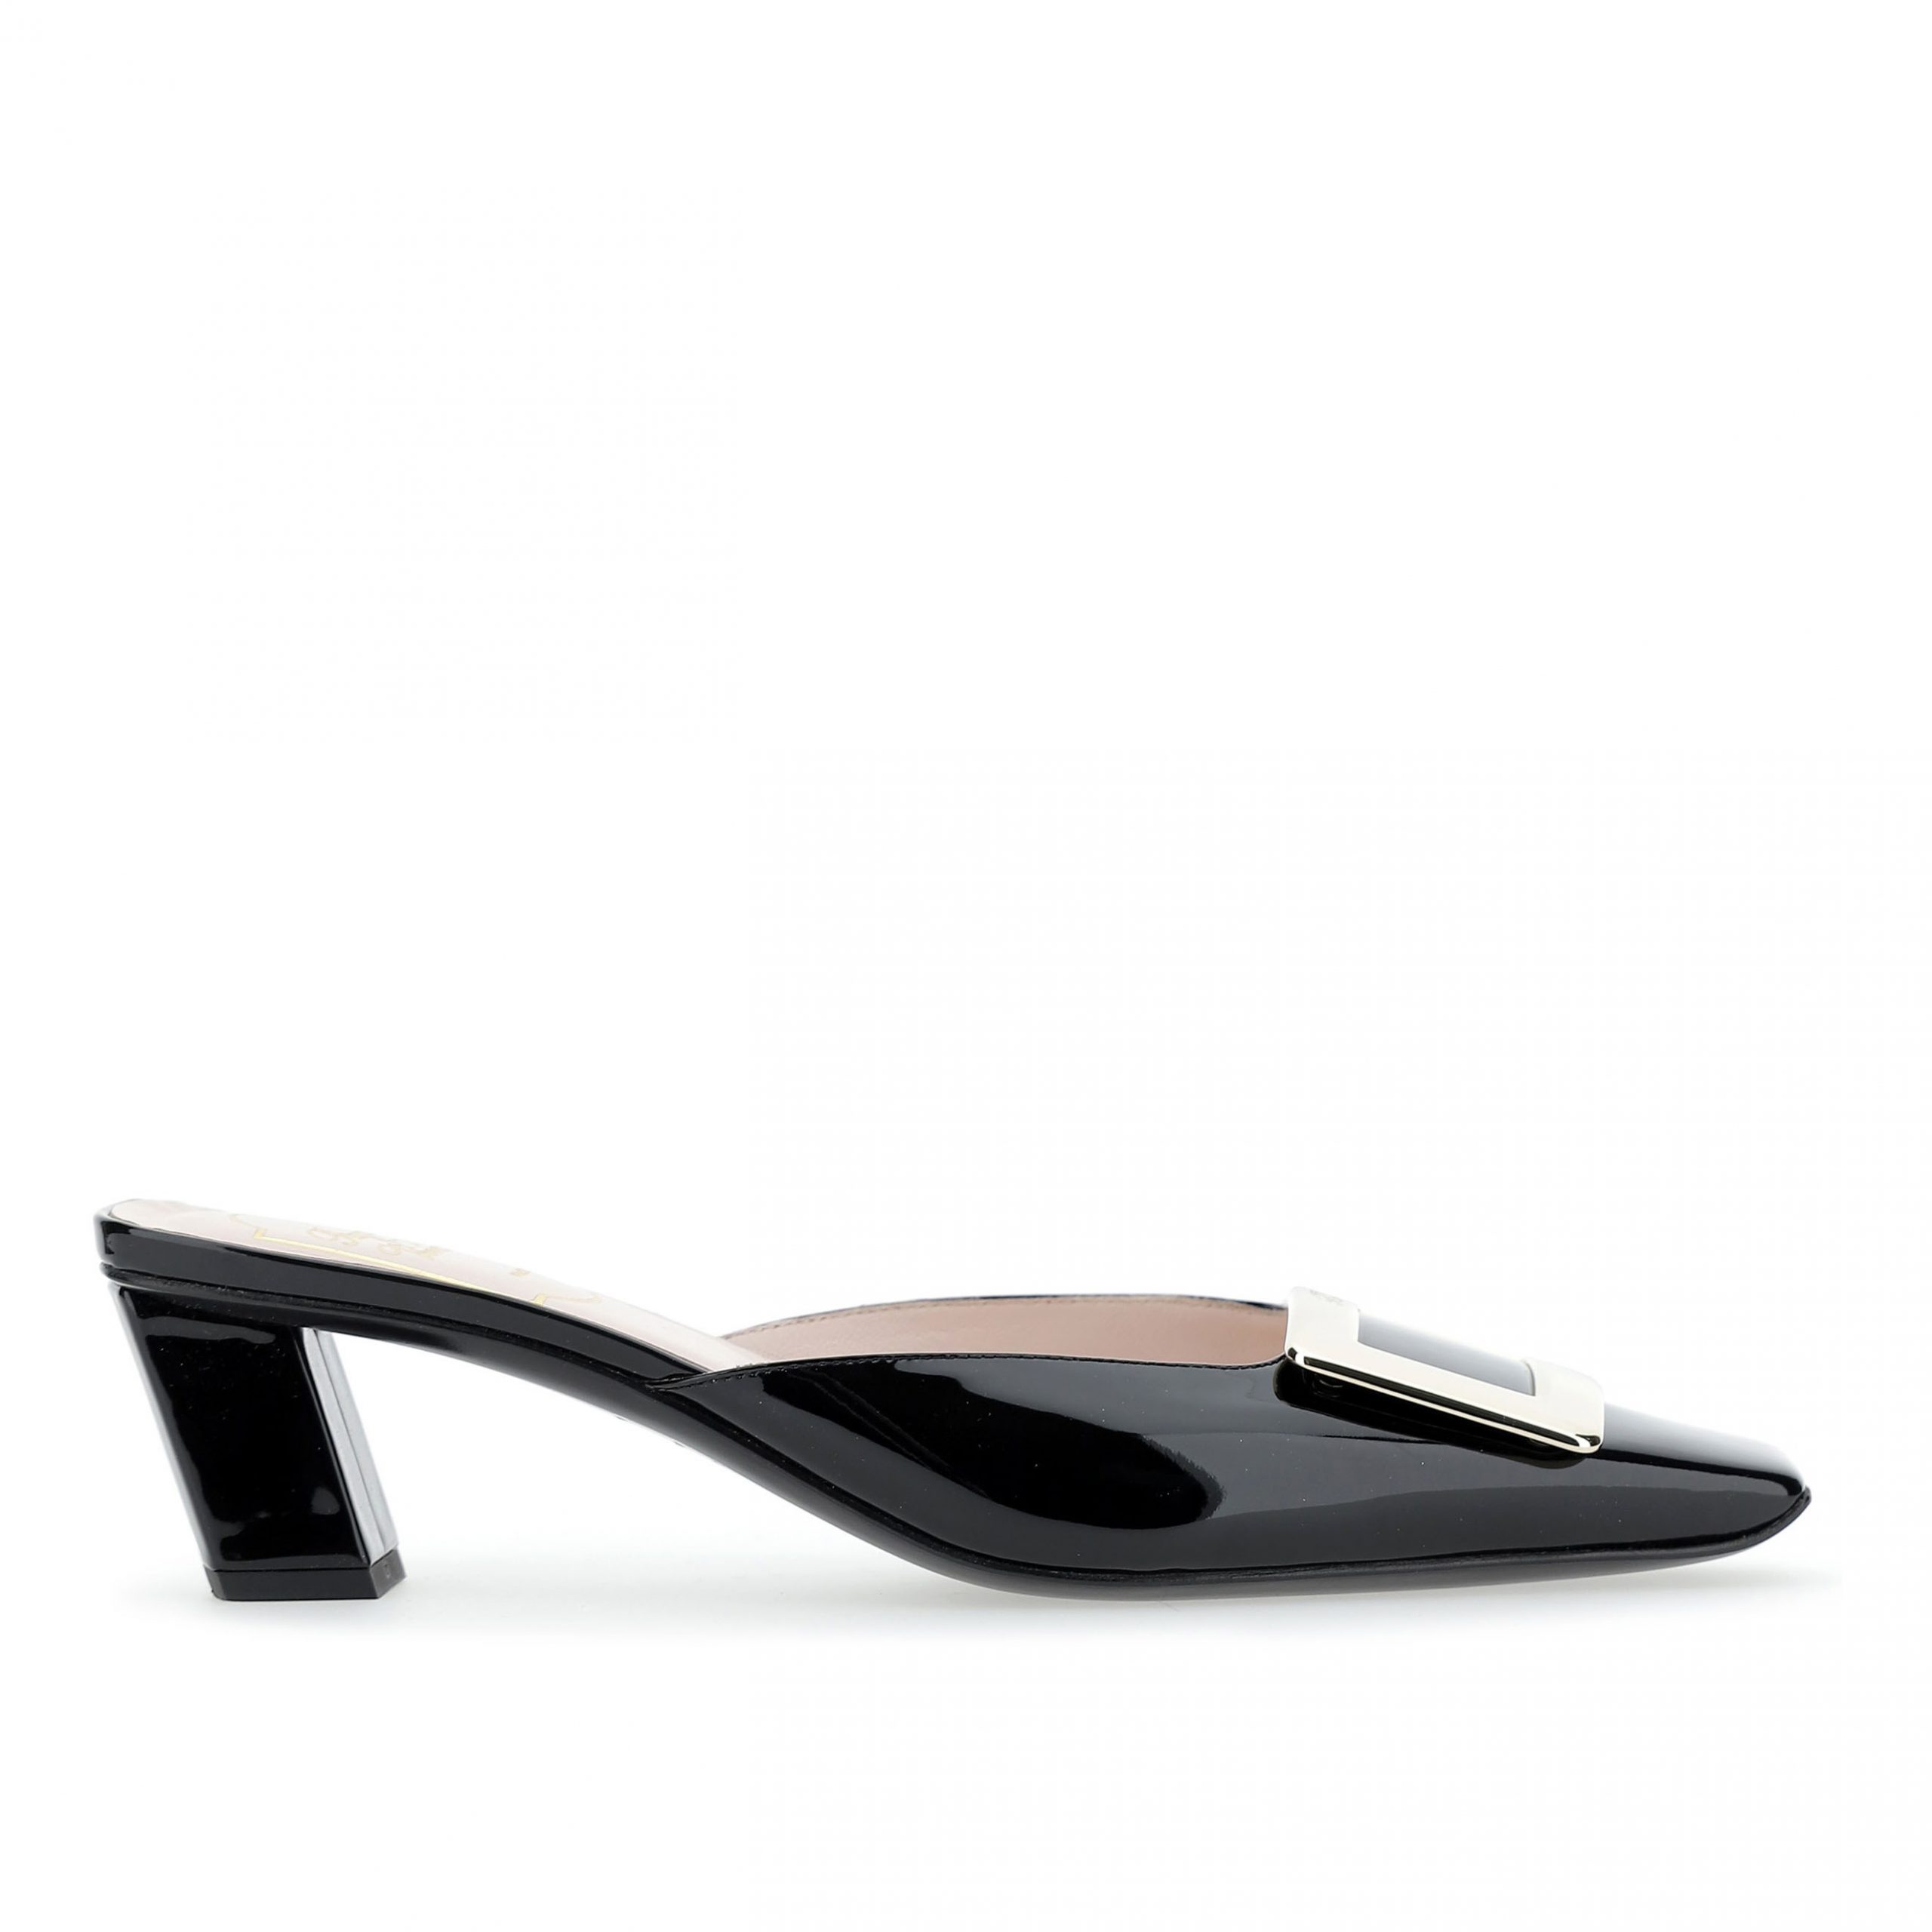 The Belle Vivier by Roger Vivier is going to become your favourite ...